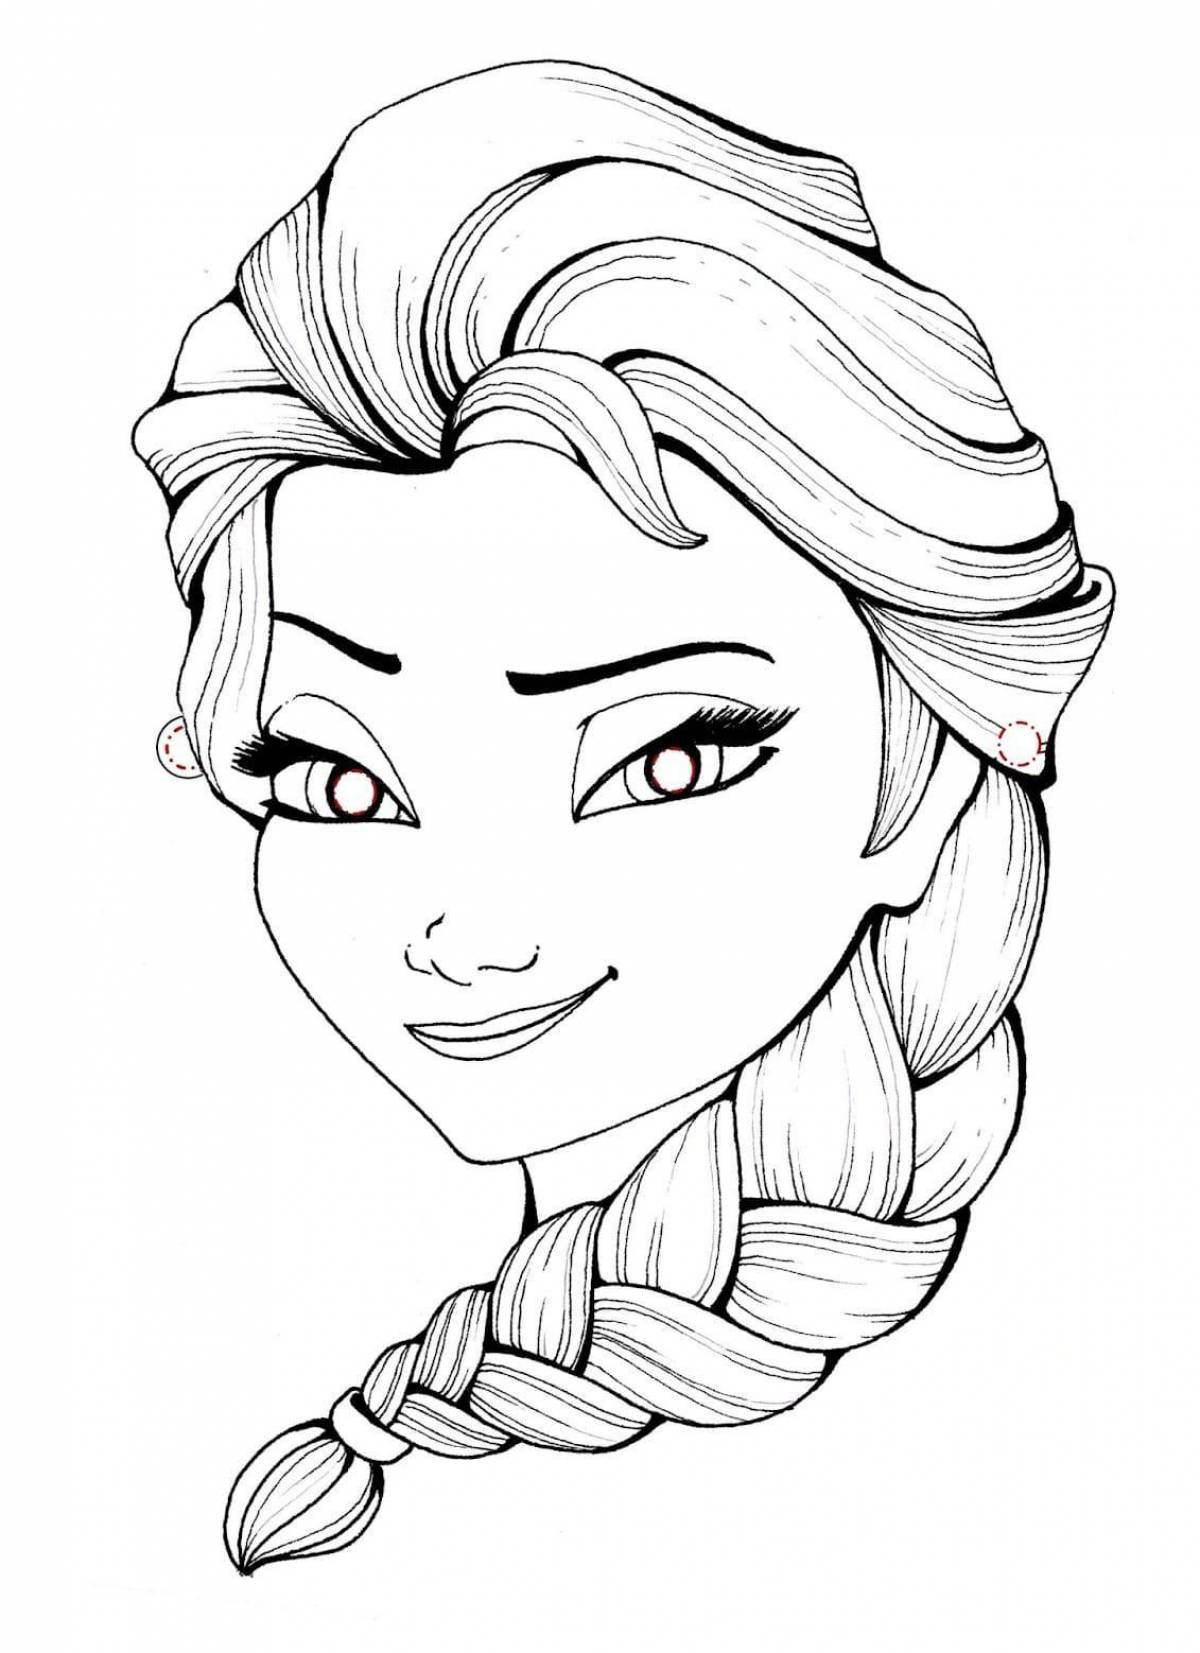 Coloring page of face with dramatic make-up